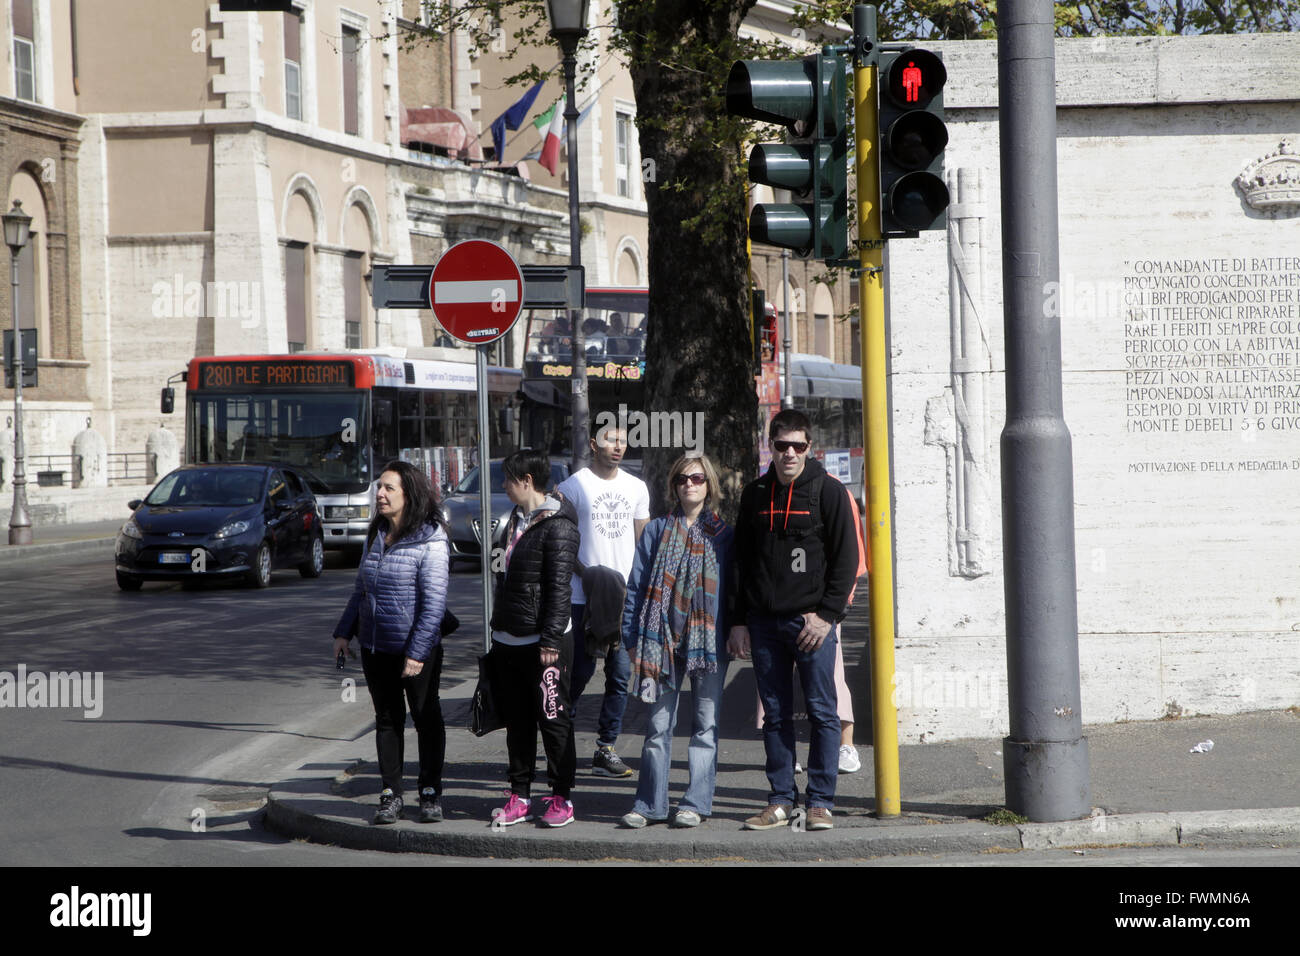 Pedestrians waiting the green light to cross the street in a sunny day at Rome, Italy Stock Photo